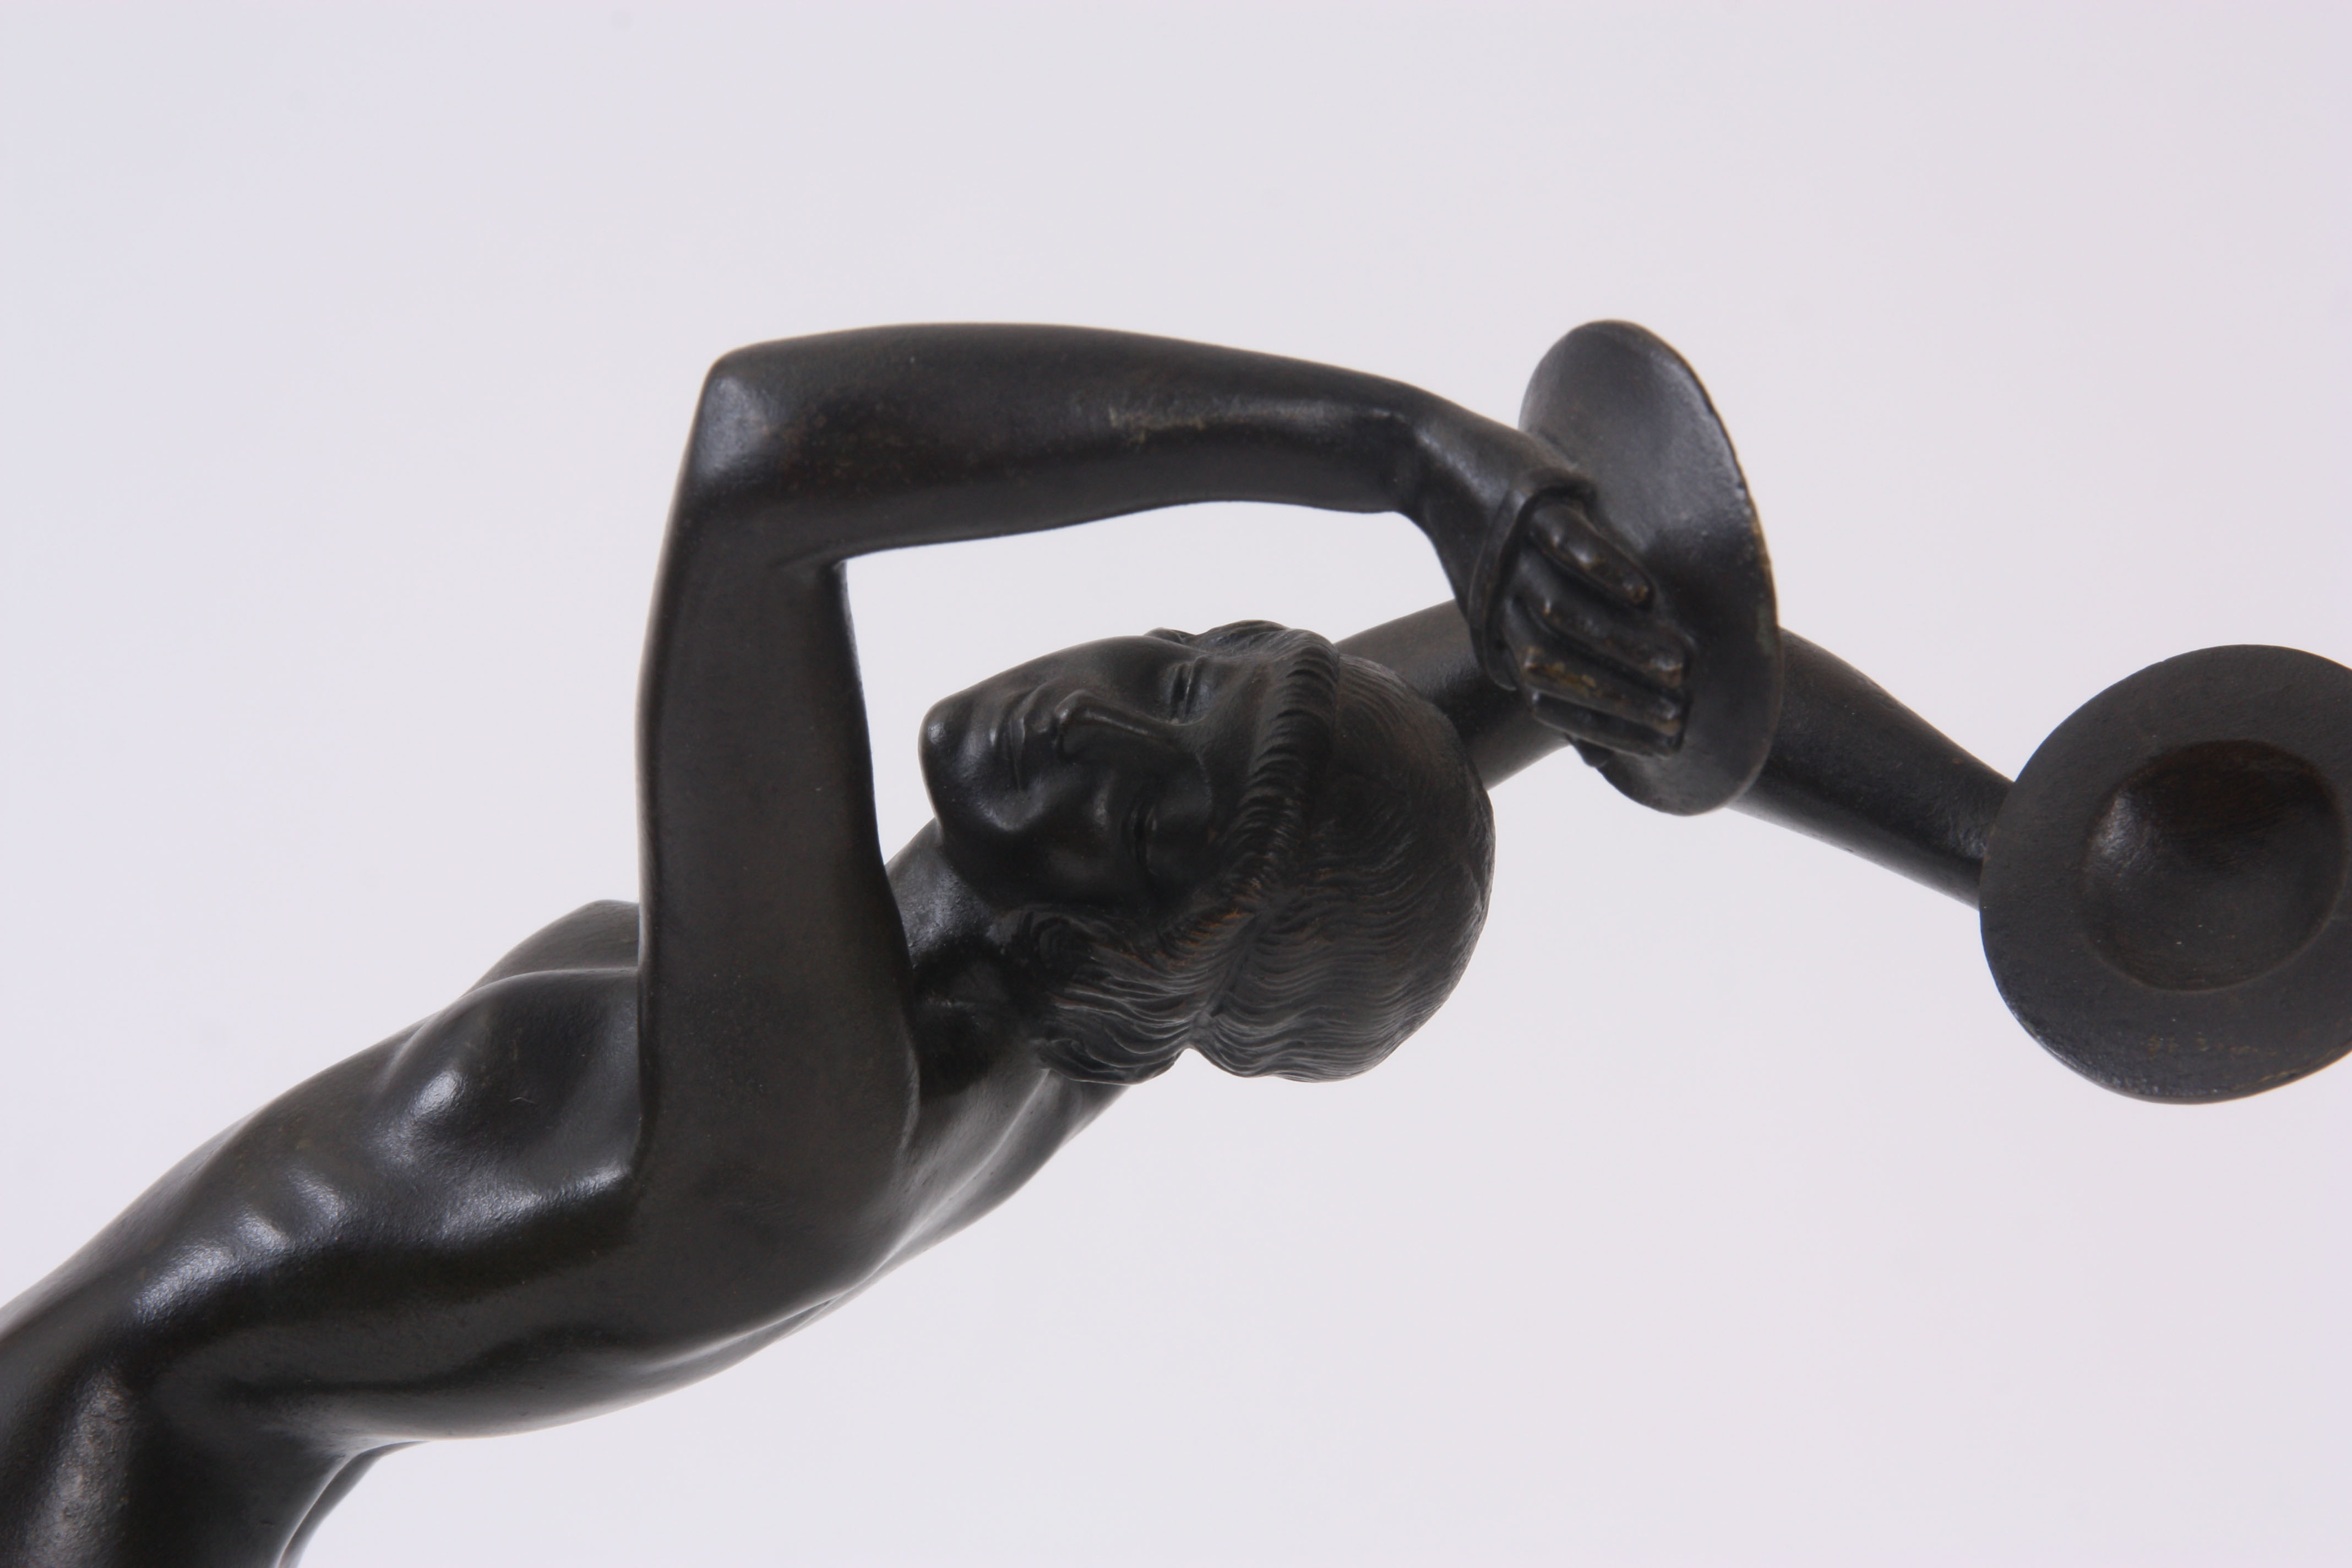 PIERRE LE FAGUAYS 1892 - 1962. A FRENCH ART DECO PATINATED BRONZE SCULPTURE formed as nude dancer - Image 6 of 9